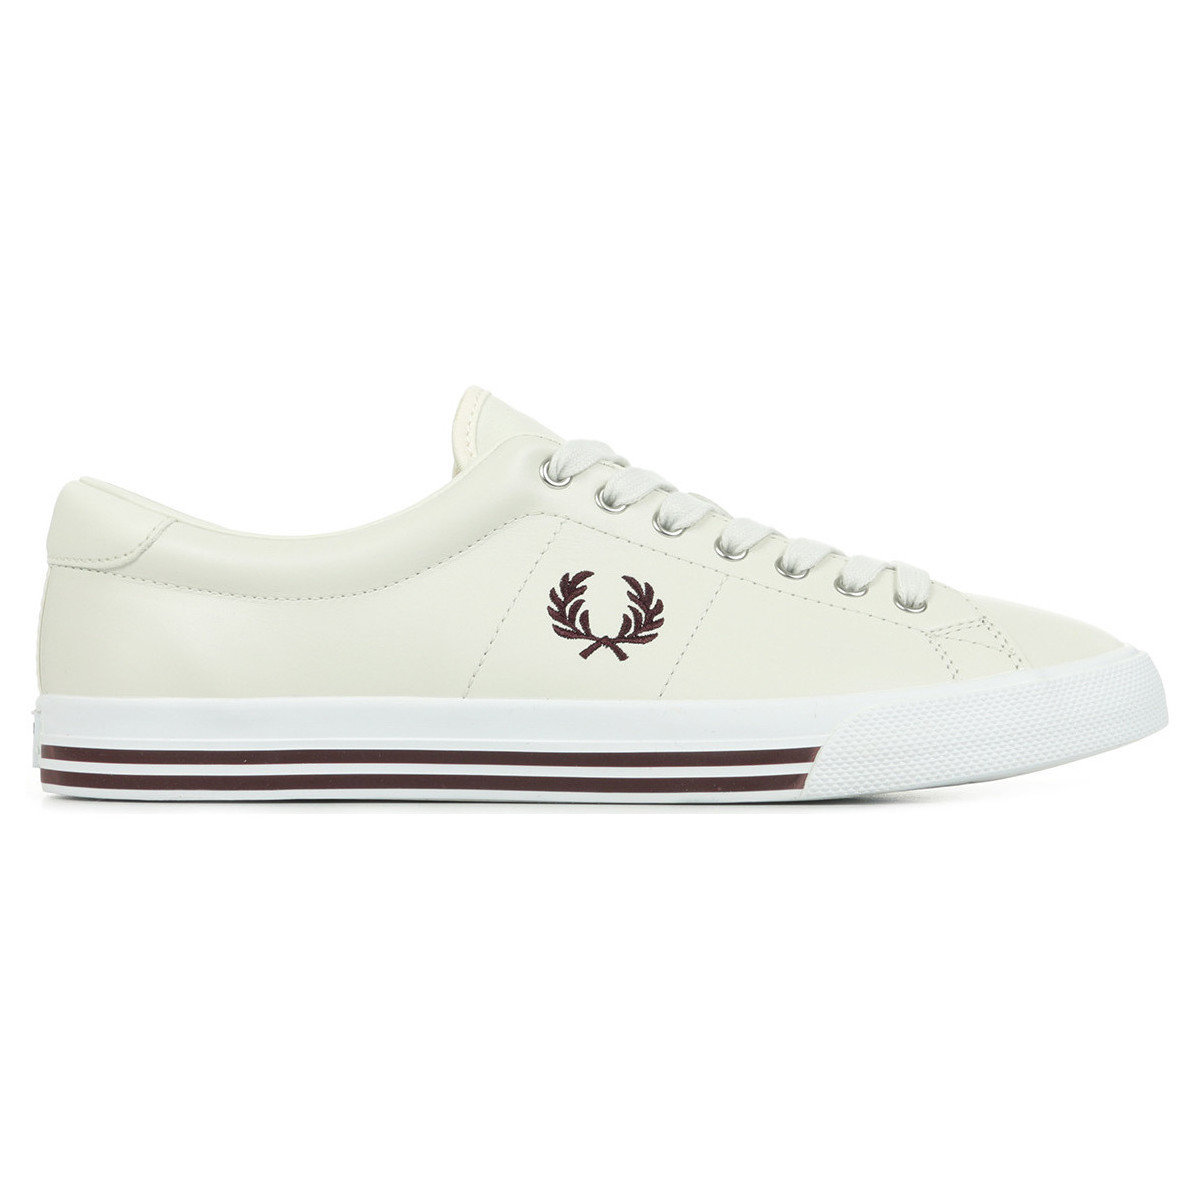 Schuhe Herren Sneaker Fred Perry Underspin Leather Other